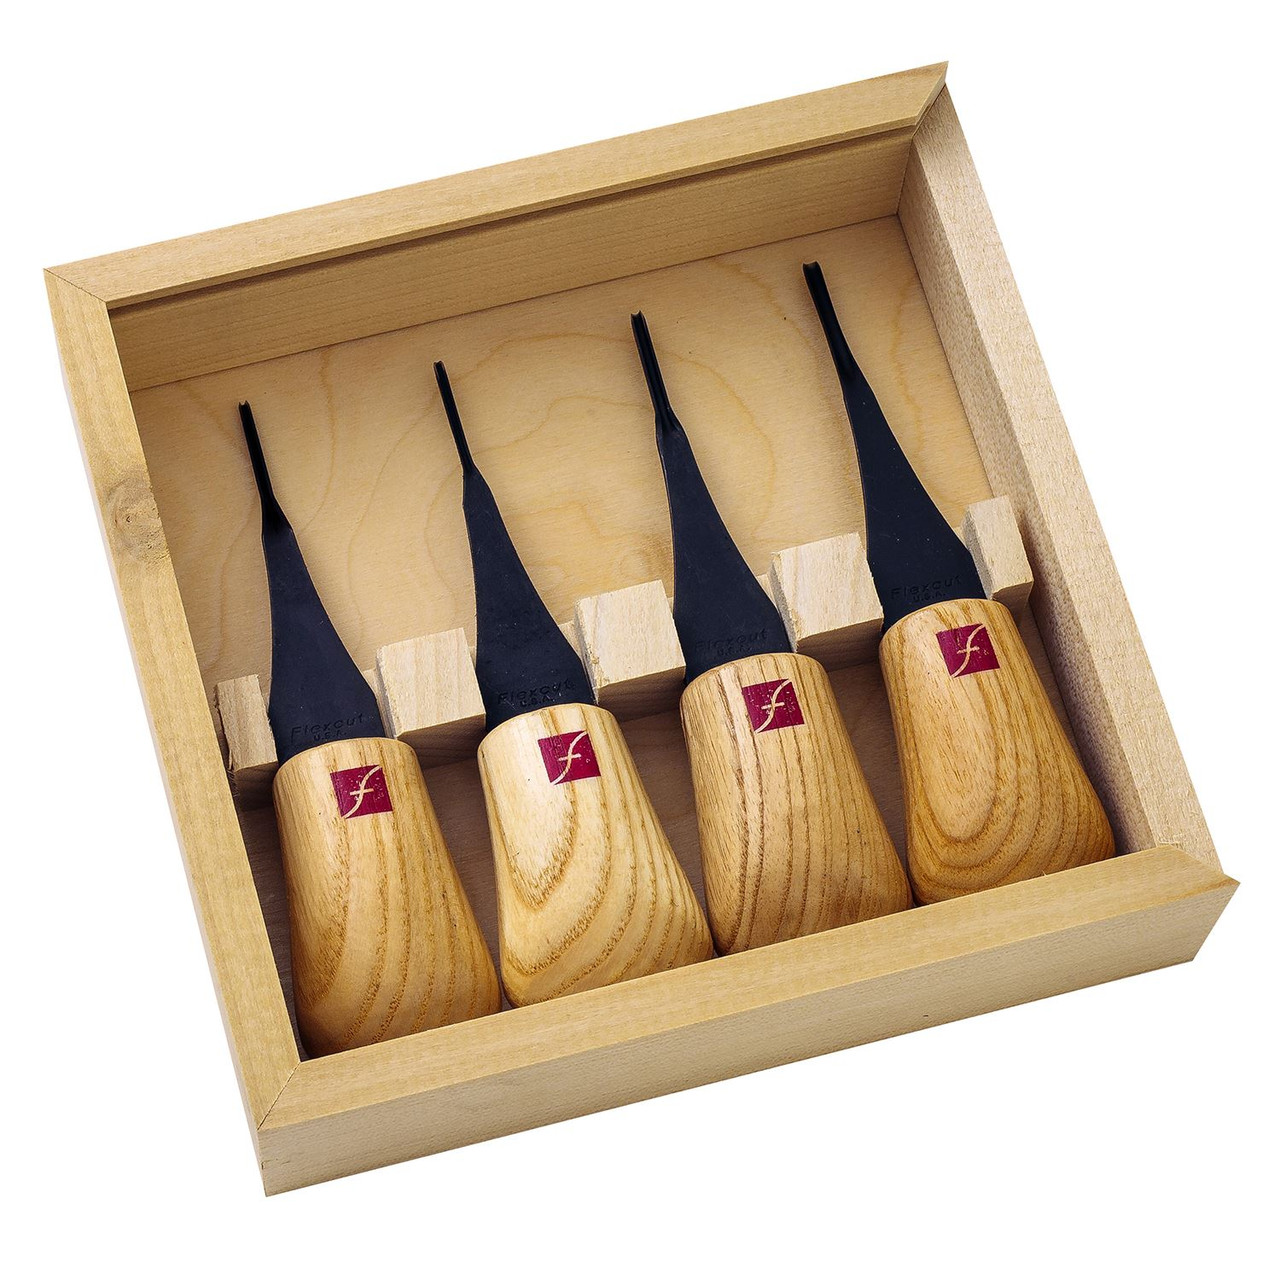 Flexcut Knife and Mixed Palm and Knife Sets